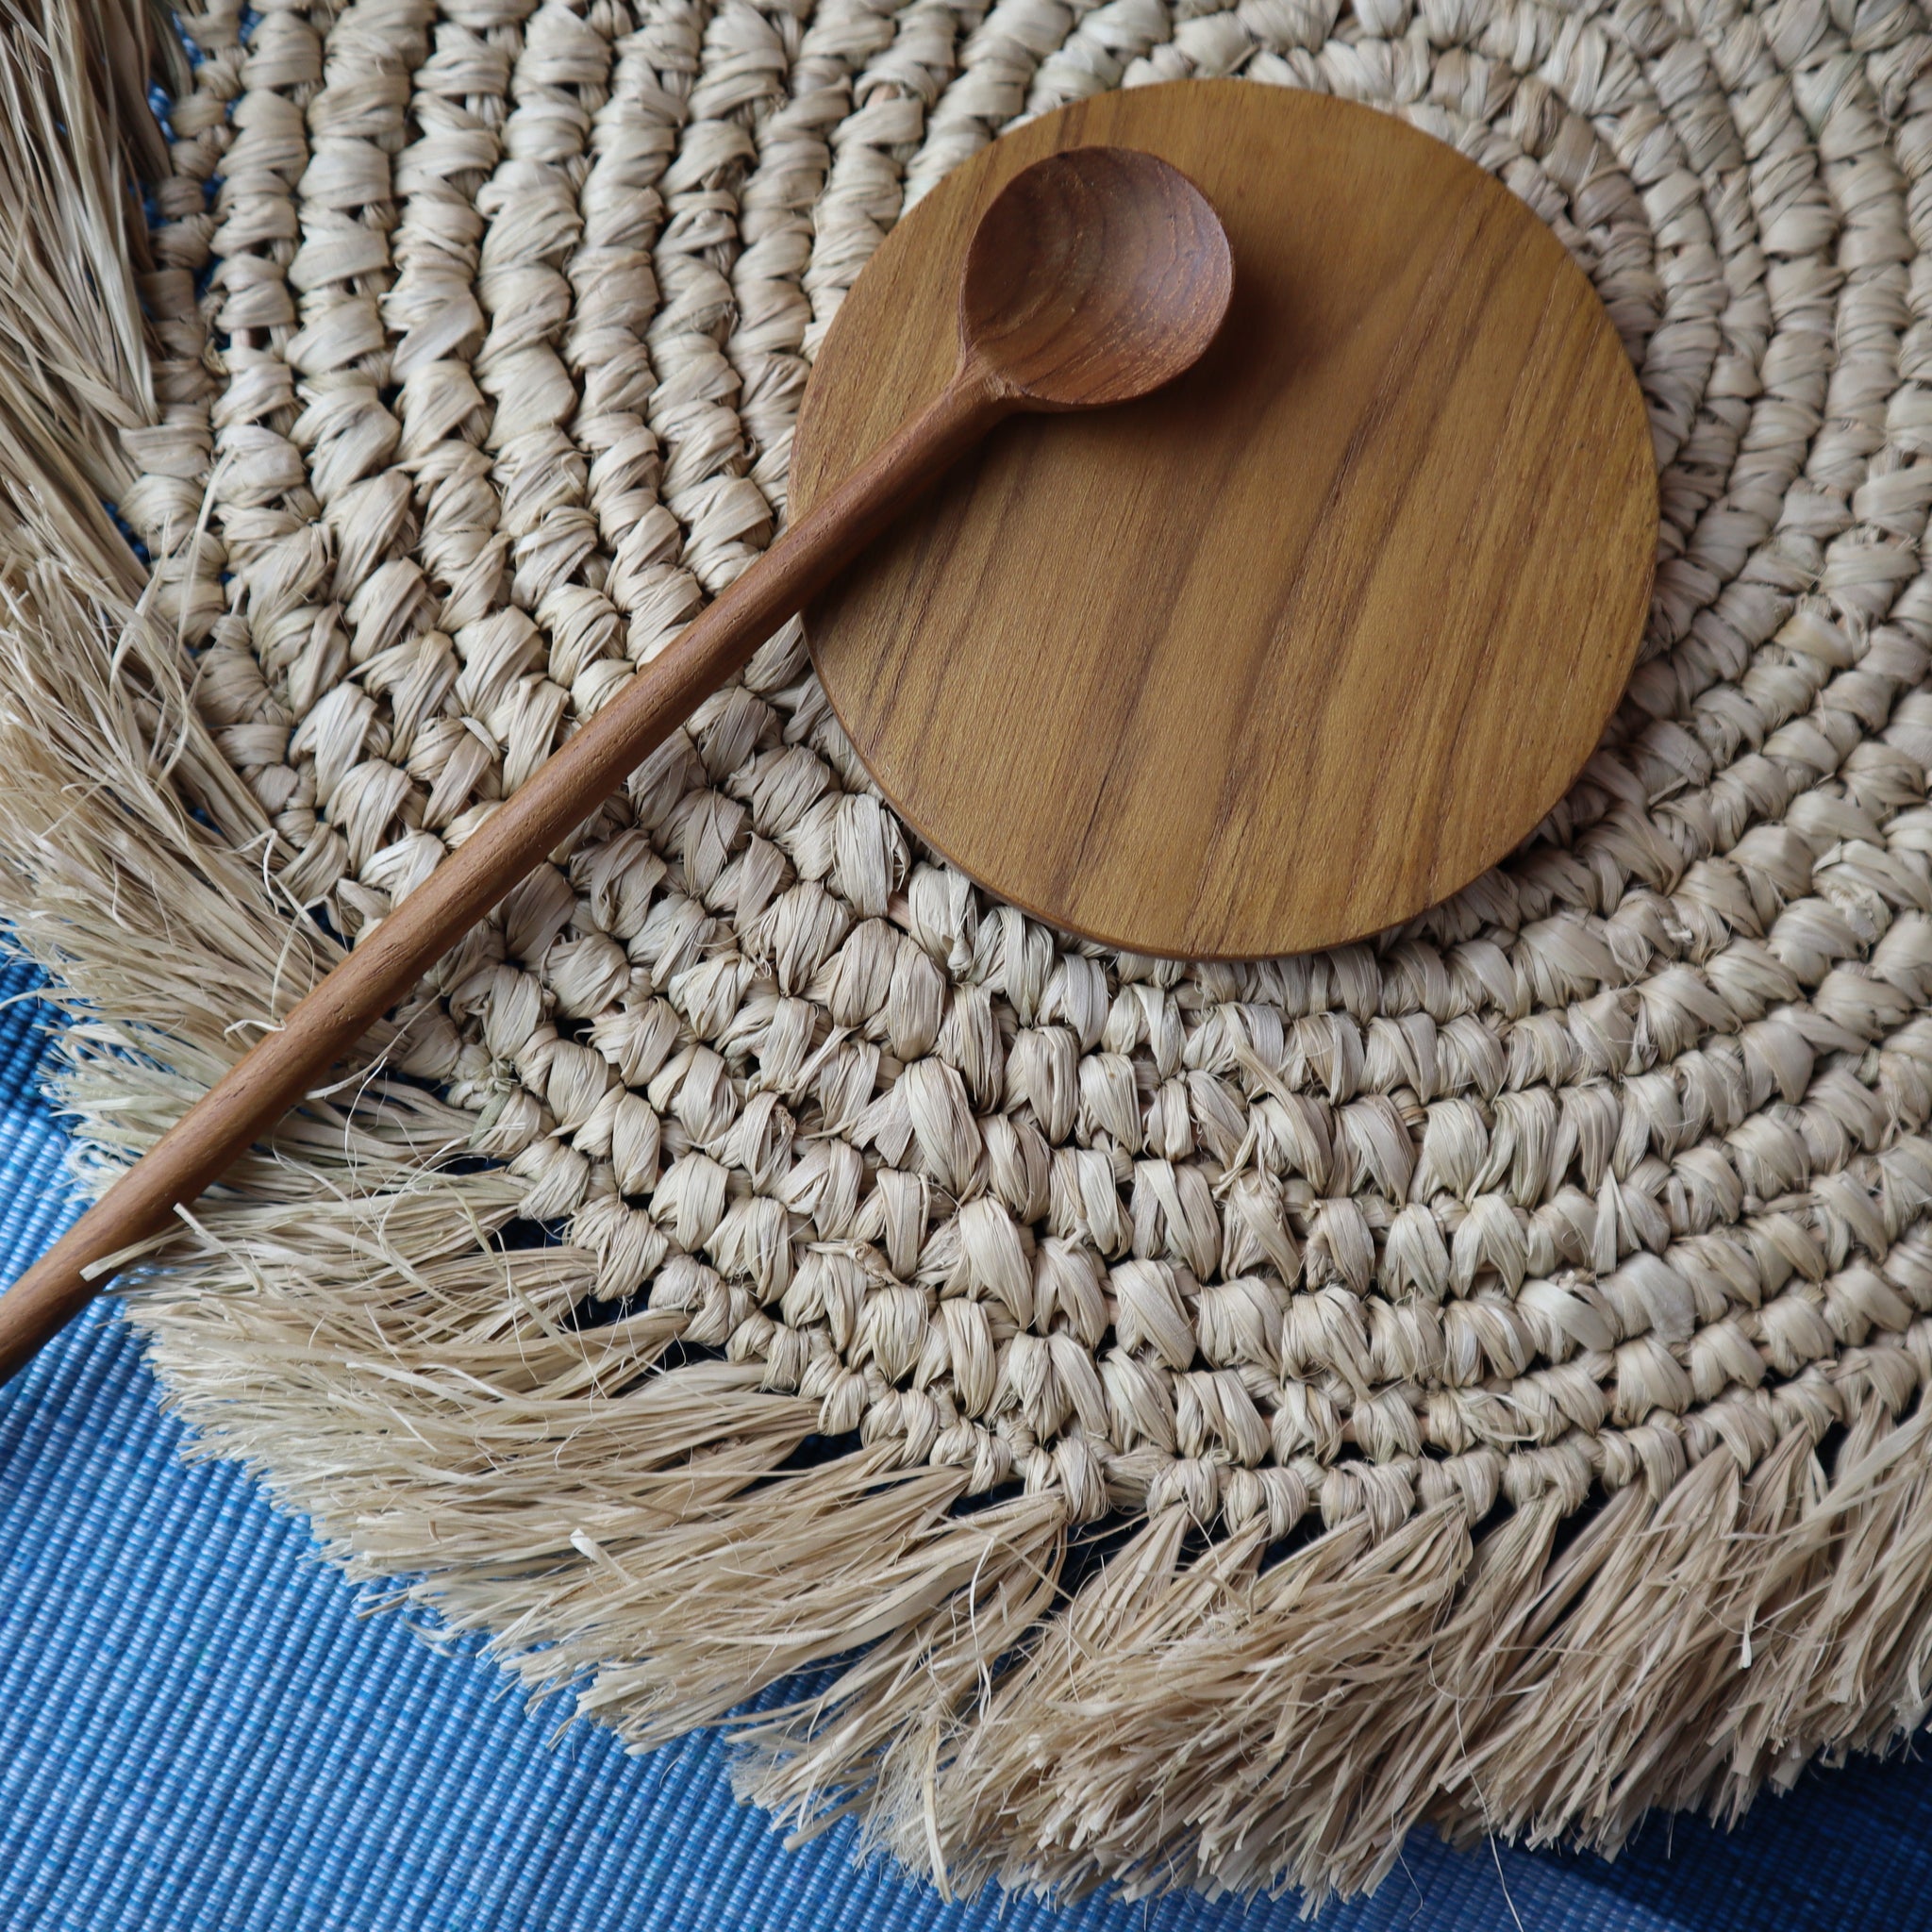 INDONESIAN NATURAL BOHO RAFFIA STRAW PLACEMAT WITH FRINGE